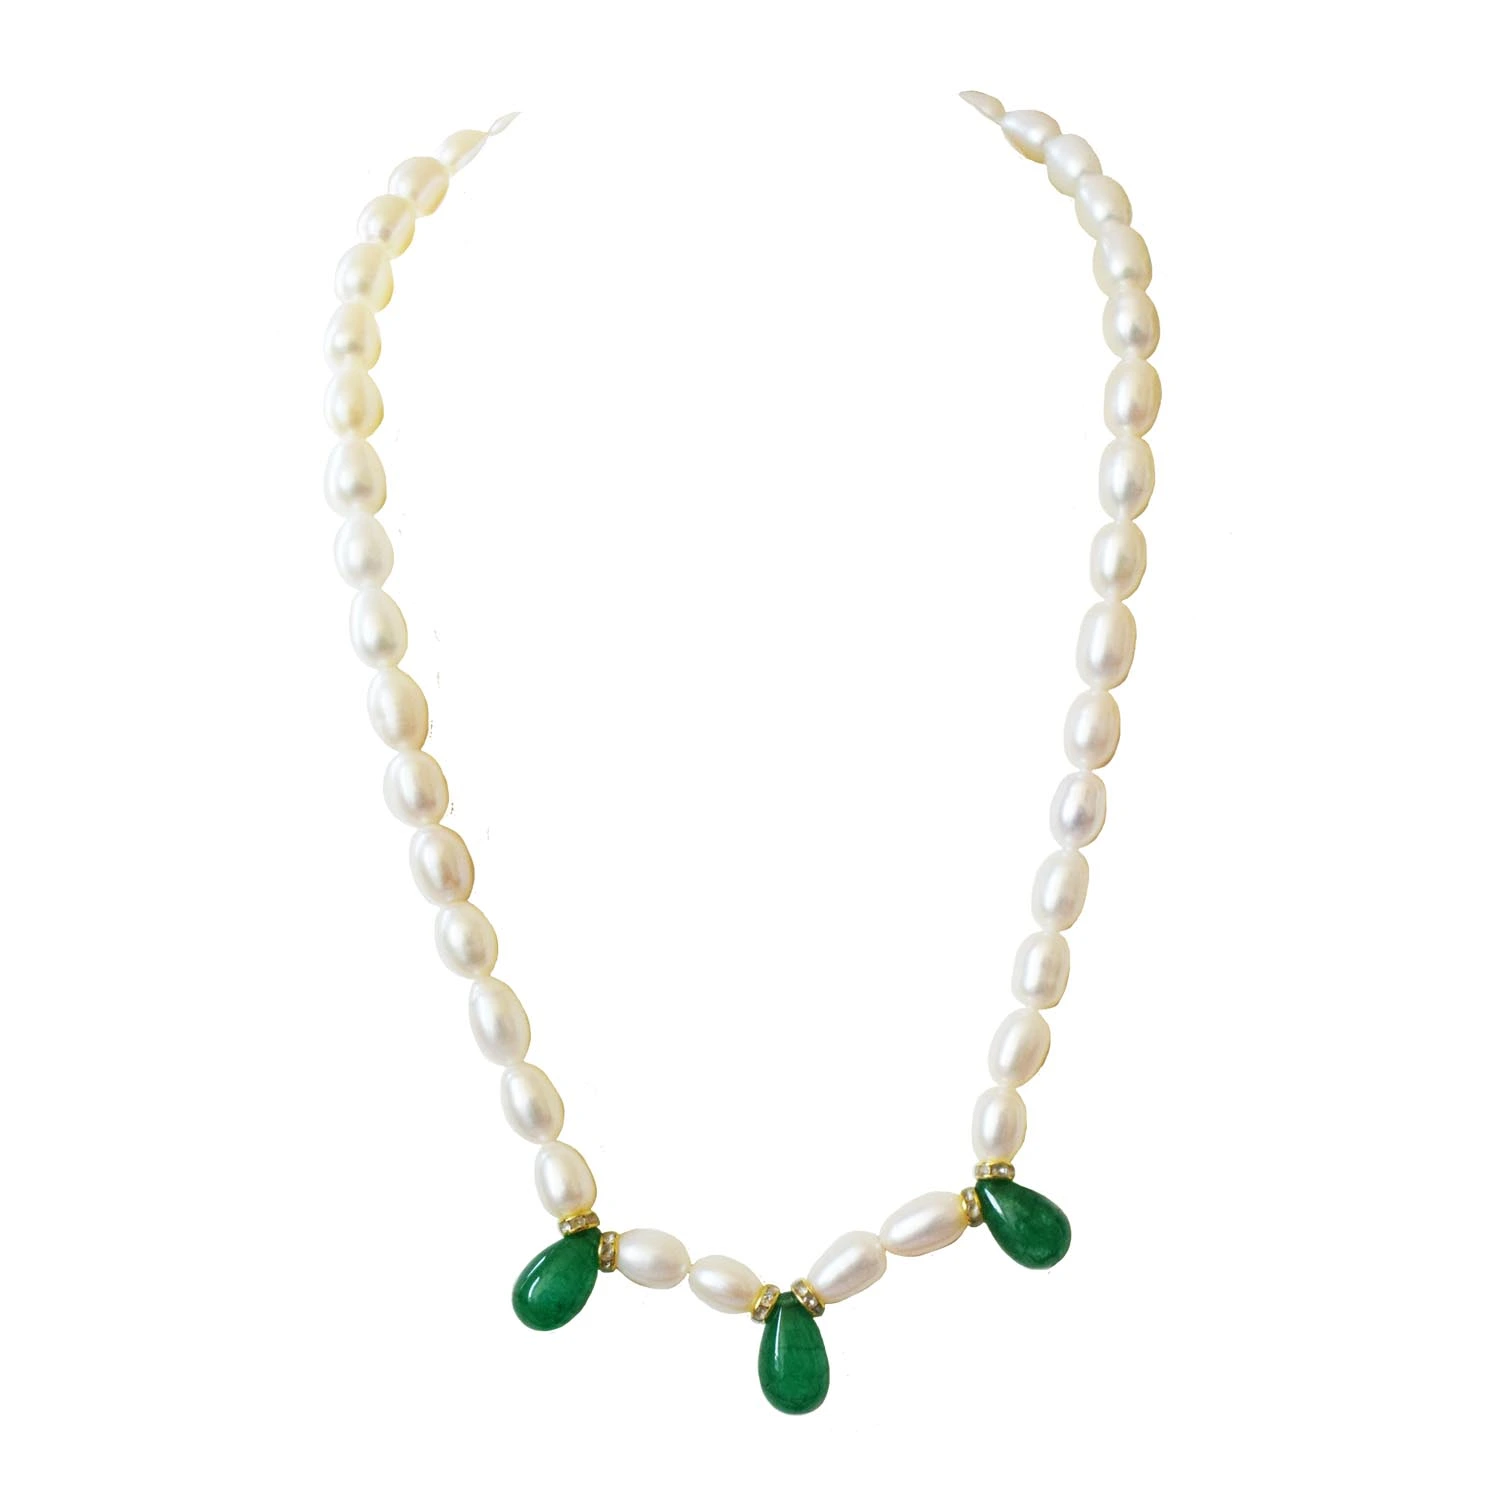 Verdant Vines: Green Onyx Drop and Elongated Pearl Necklace (SN1033)